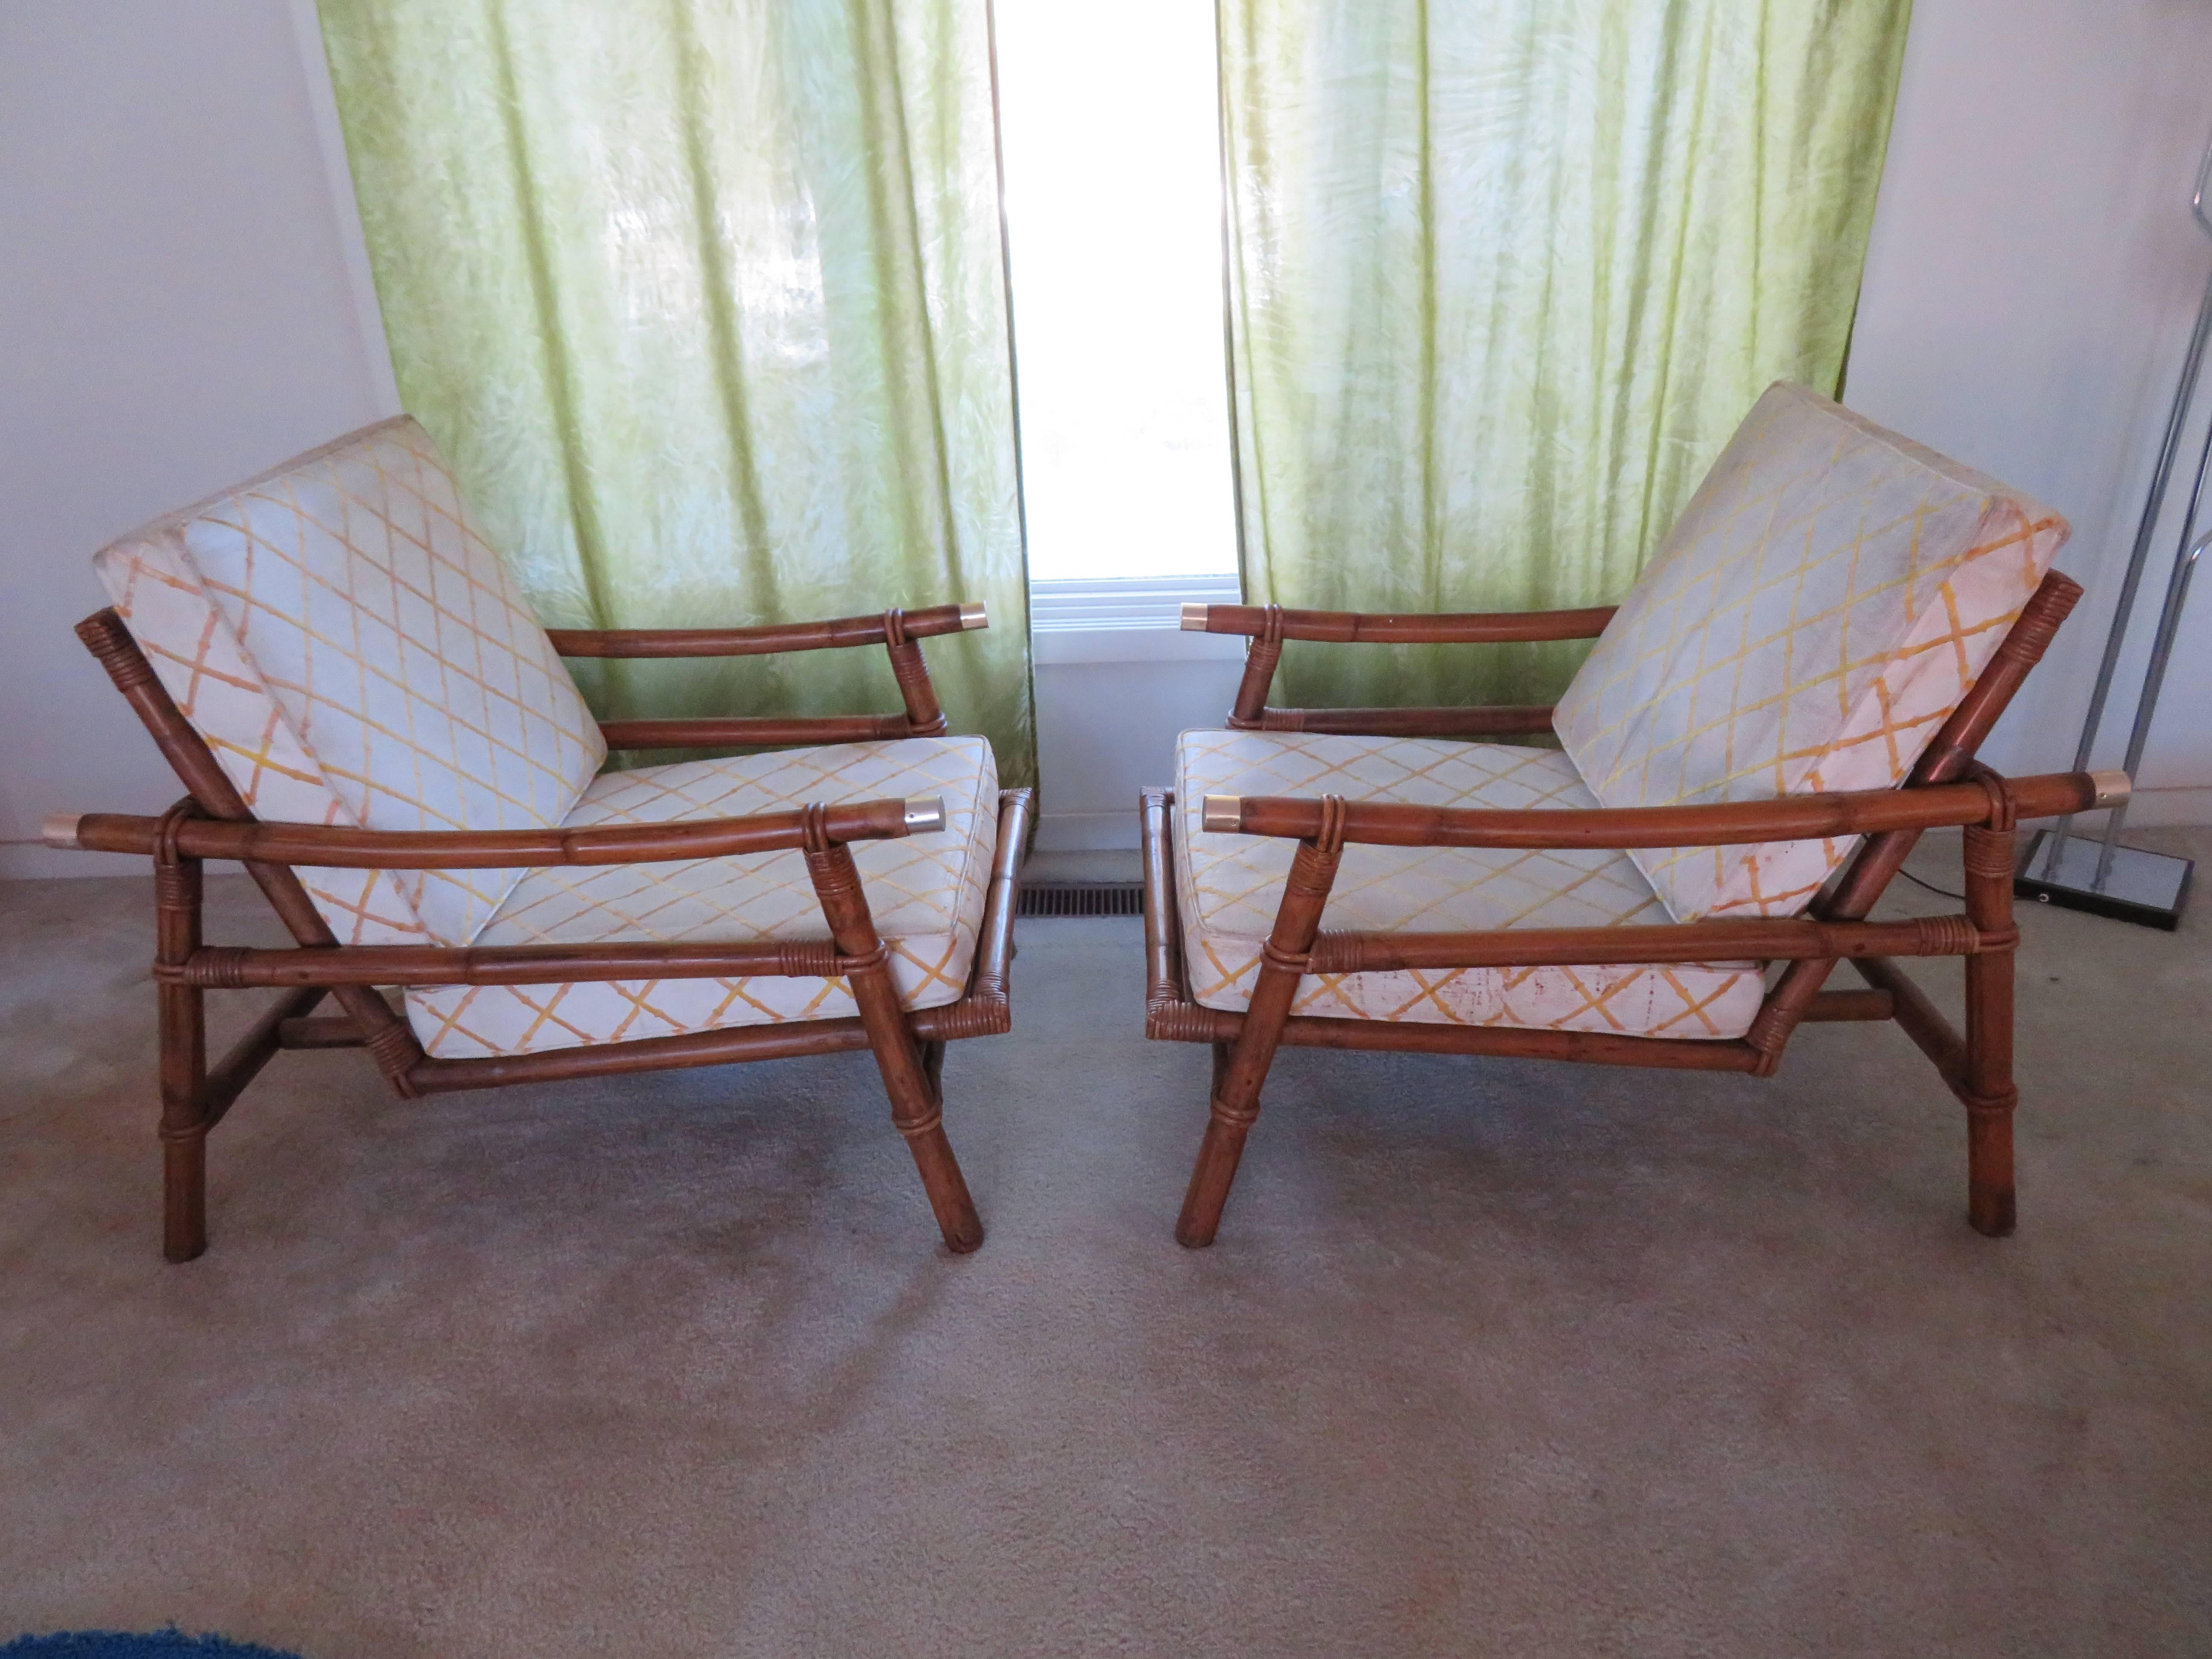 An exceptional pair of vintage Campaign style lounge chairs with matching ottomans. Stout rattan and hardwood frame with a beautiful raffia seat back. Fabulous design, quality and craftsmanship. Aged to absolute perfection the frames are in fabulous